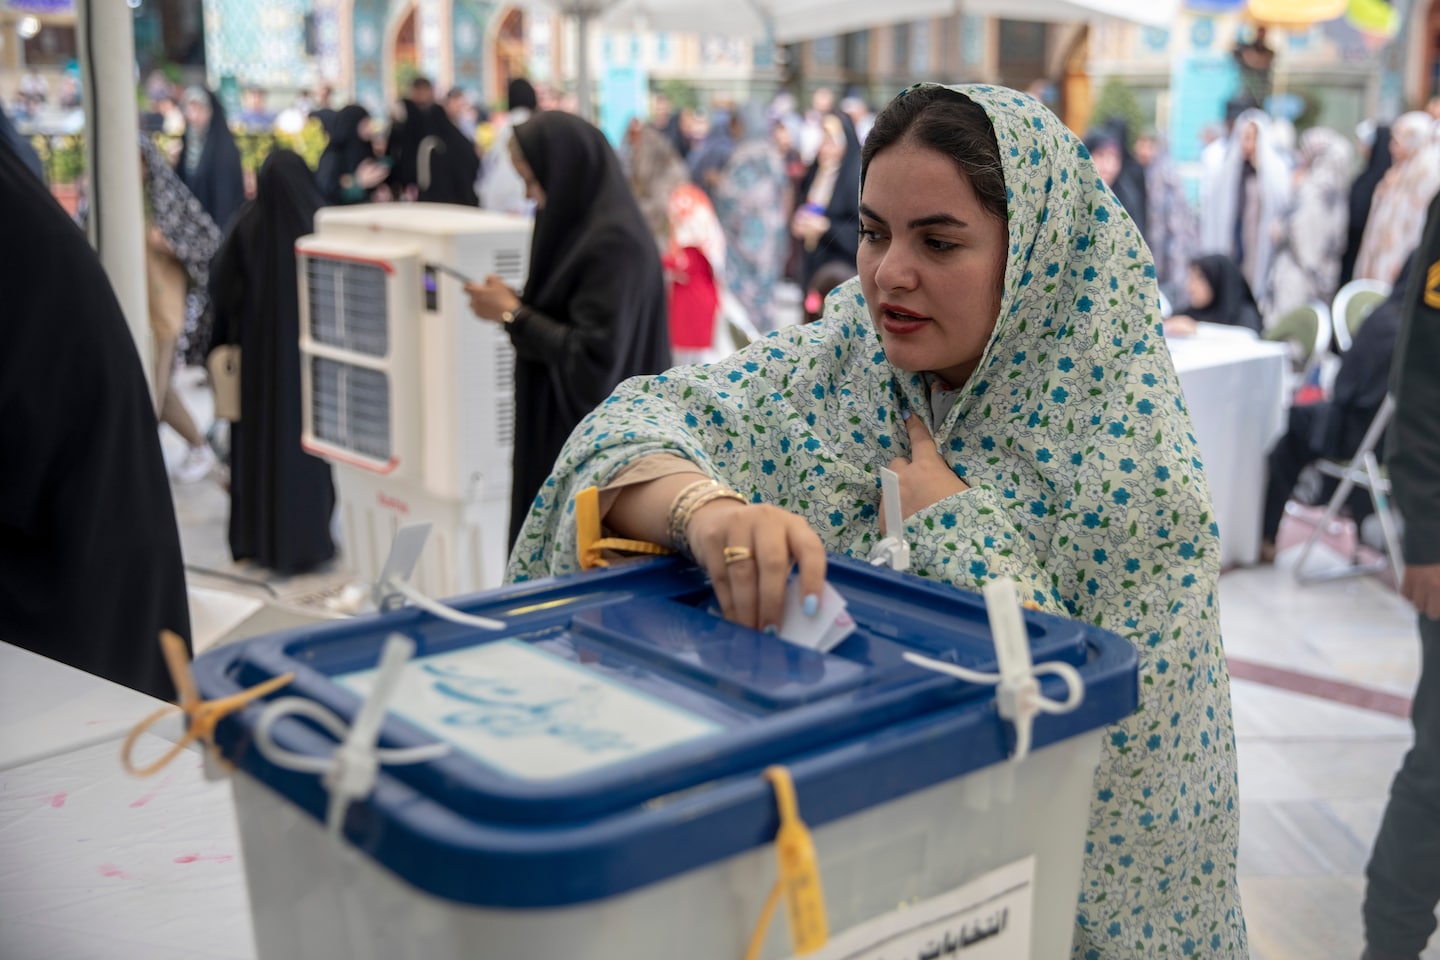 Iran election goes to a runoff between a reformist and conservative